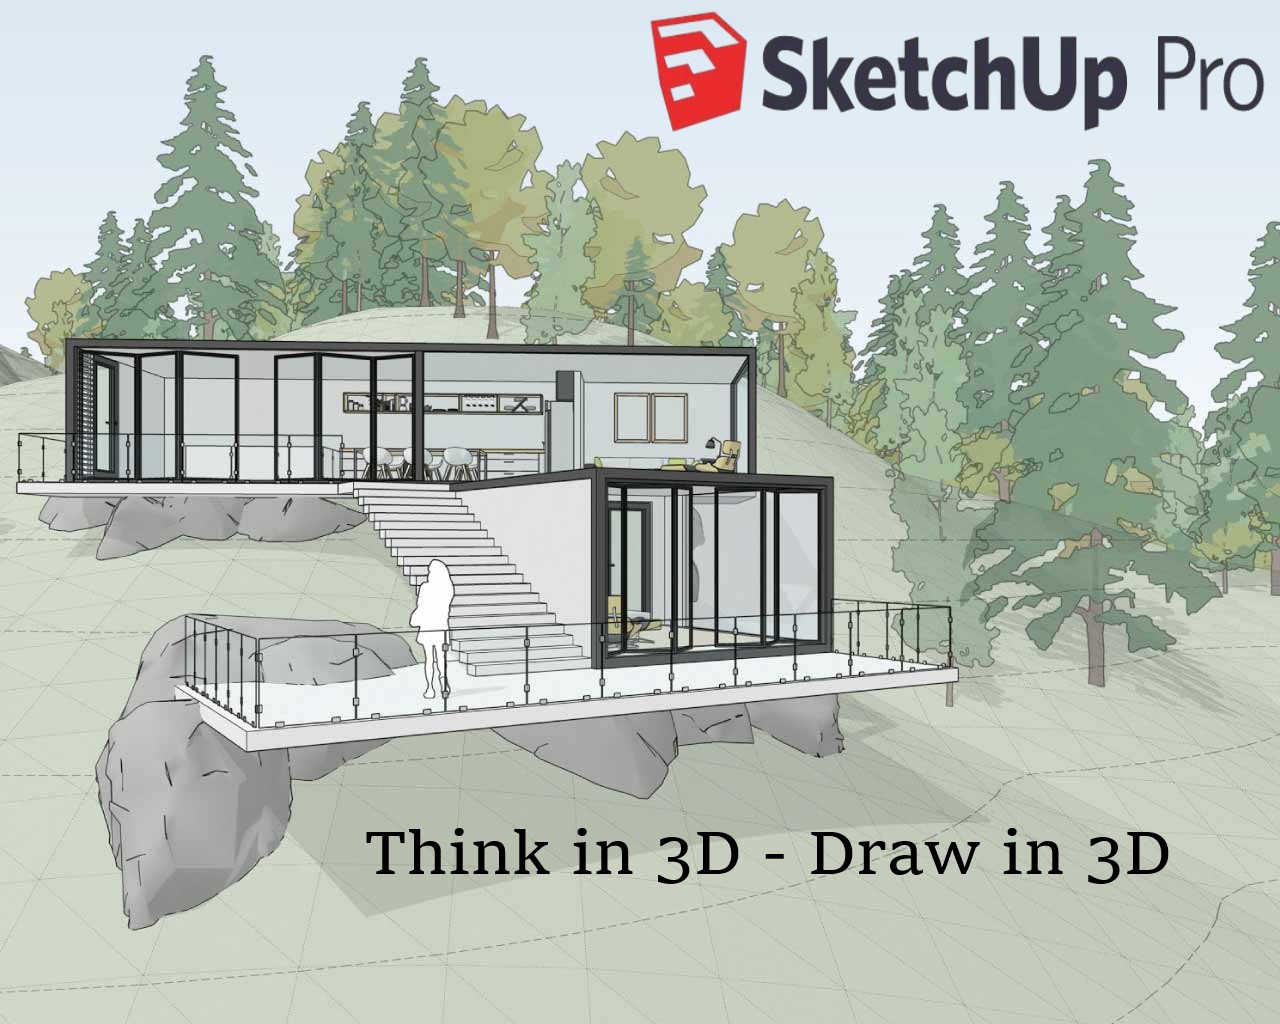 SketchUp for Schools - Product | SketchUp